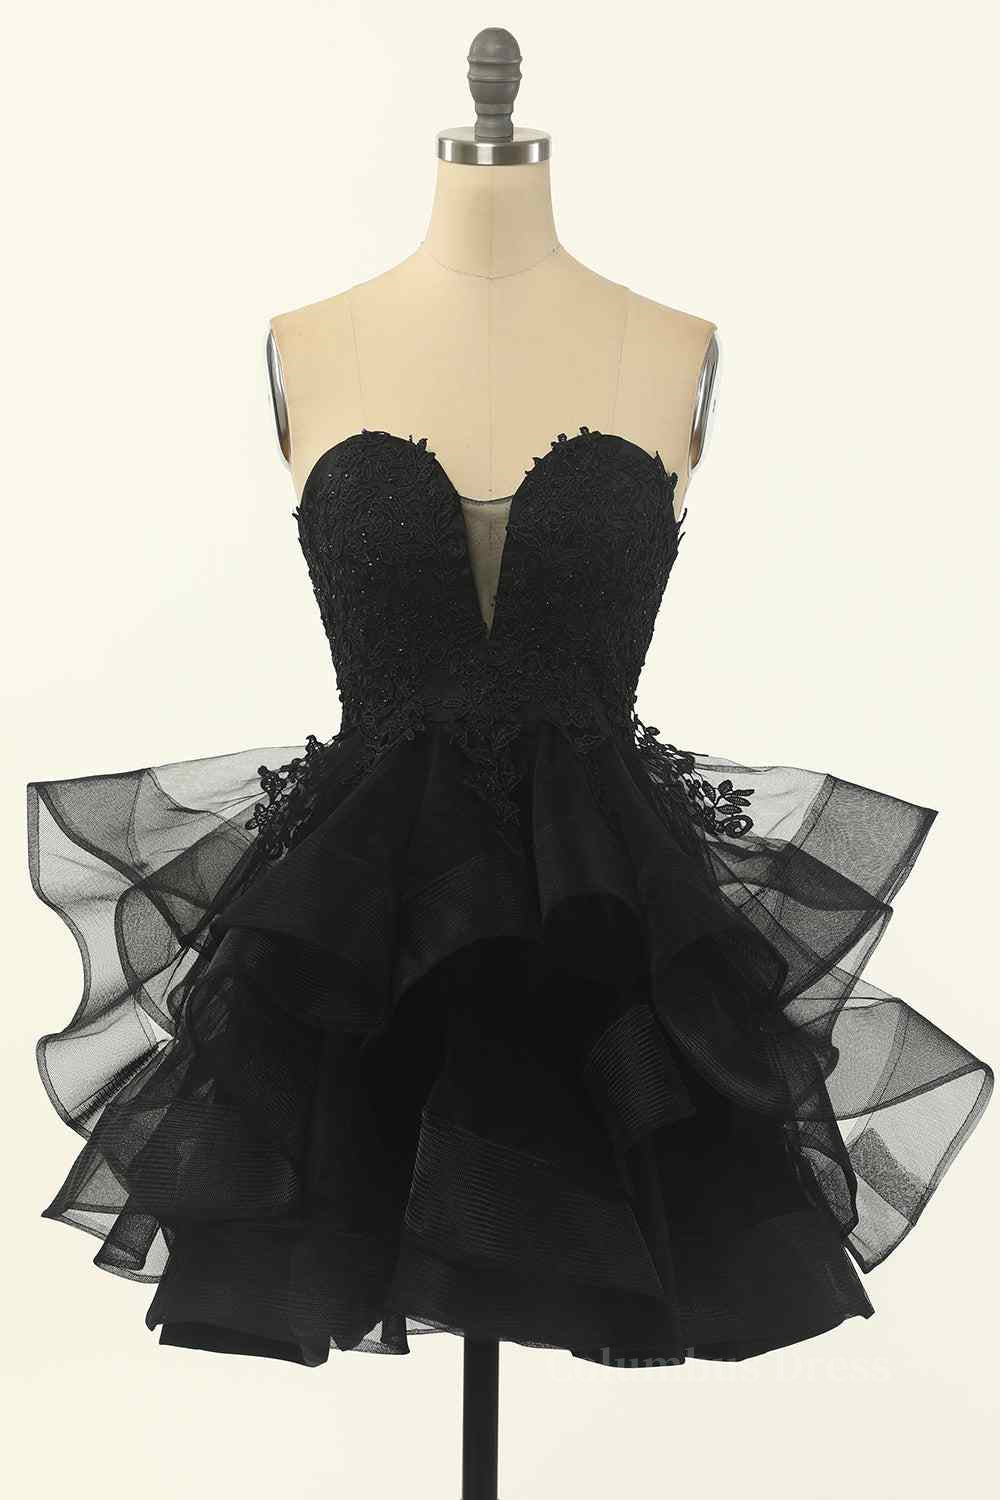 Black A-line Strapless V Neck Applique Multi-Layers Mini Corset Homecoming Dress outfit, Formal Dresses For Weddings